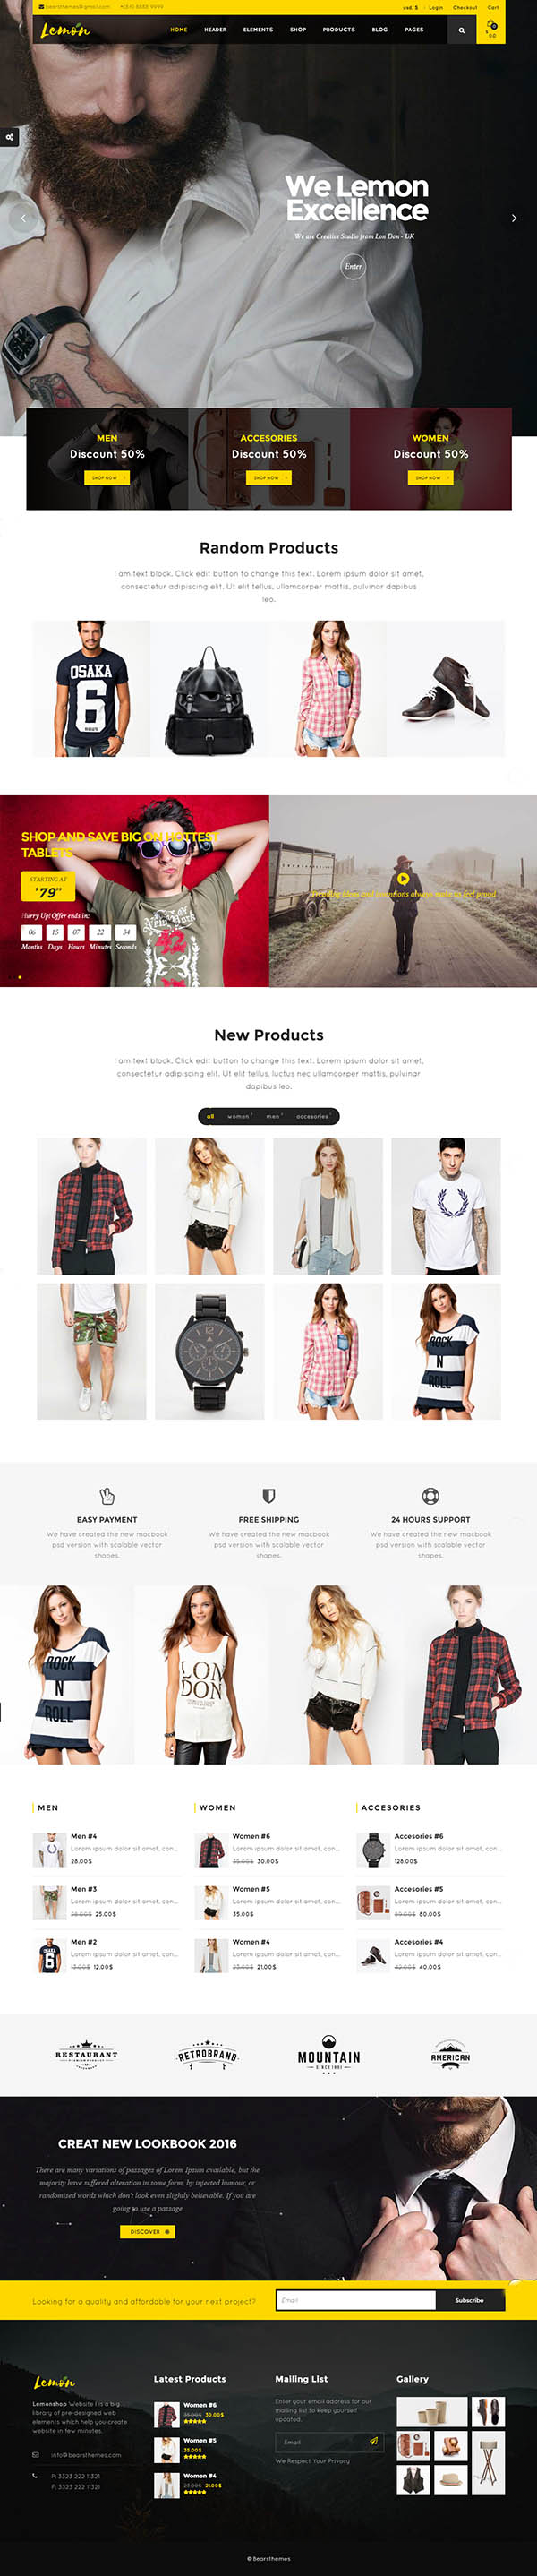 Lemon - A Clean and Smooth WooCommerce WordPress Theme